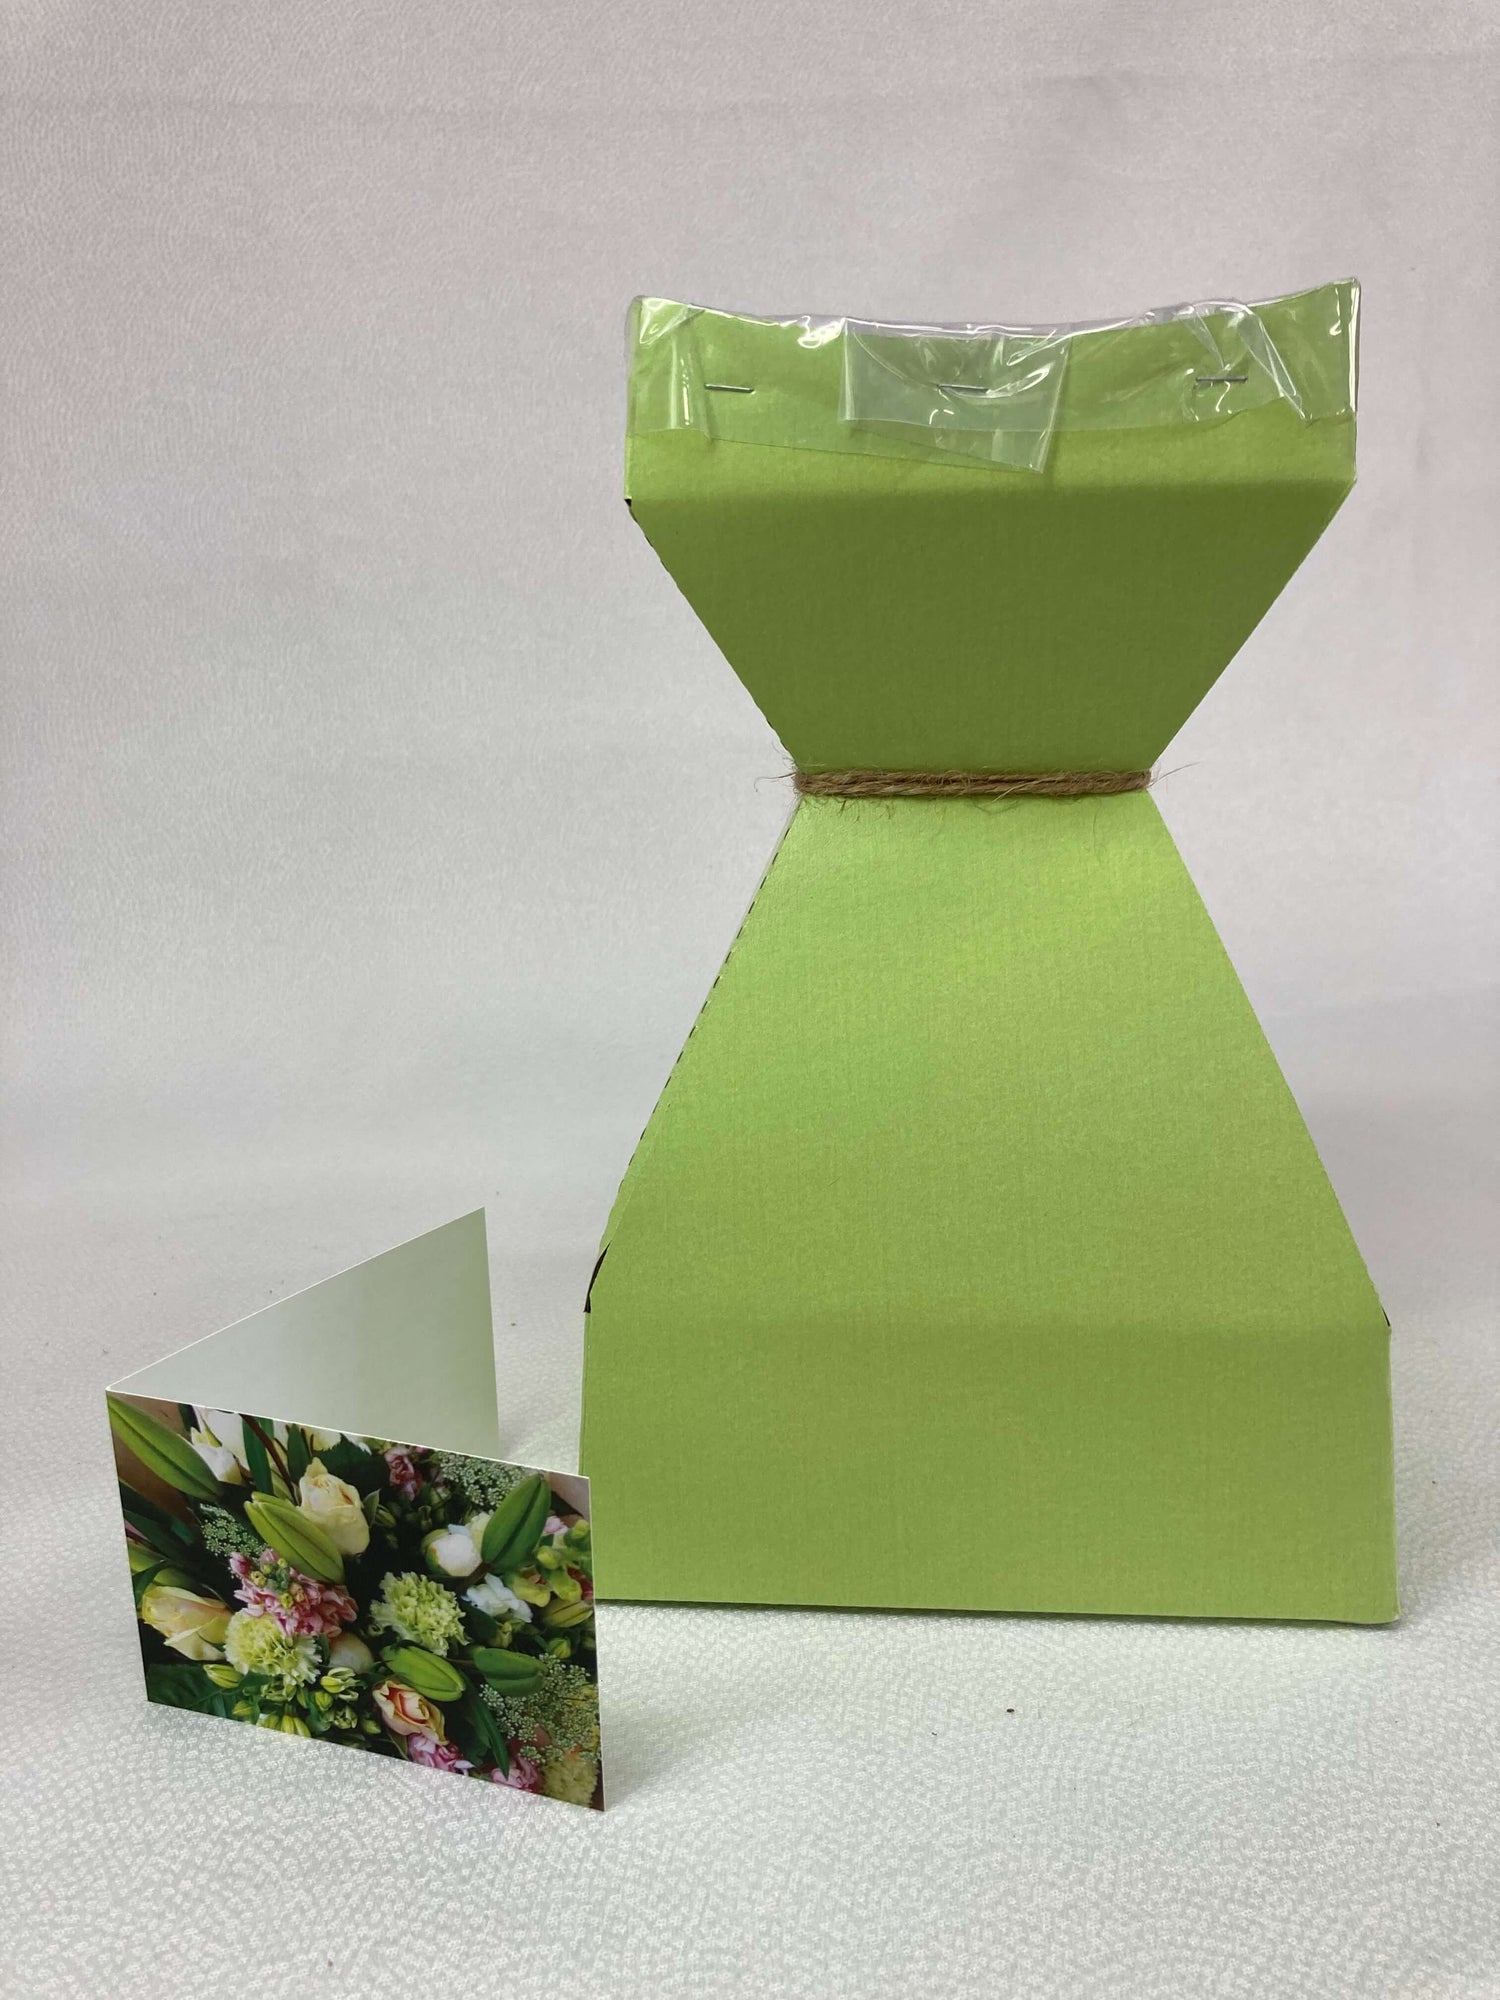 Water-filled box to preserve flowers when a vase isn't readily available. Picture also shows our complimentary cards we include with every order for your personal note.